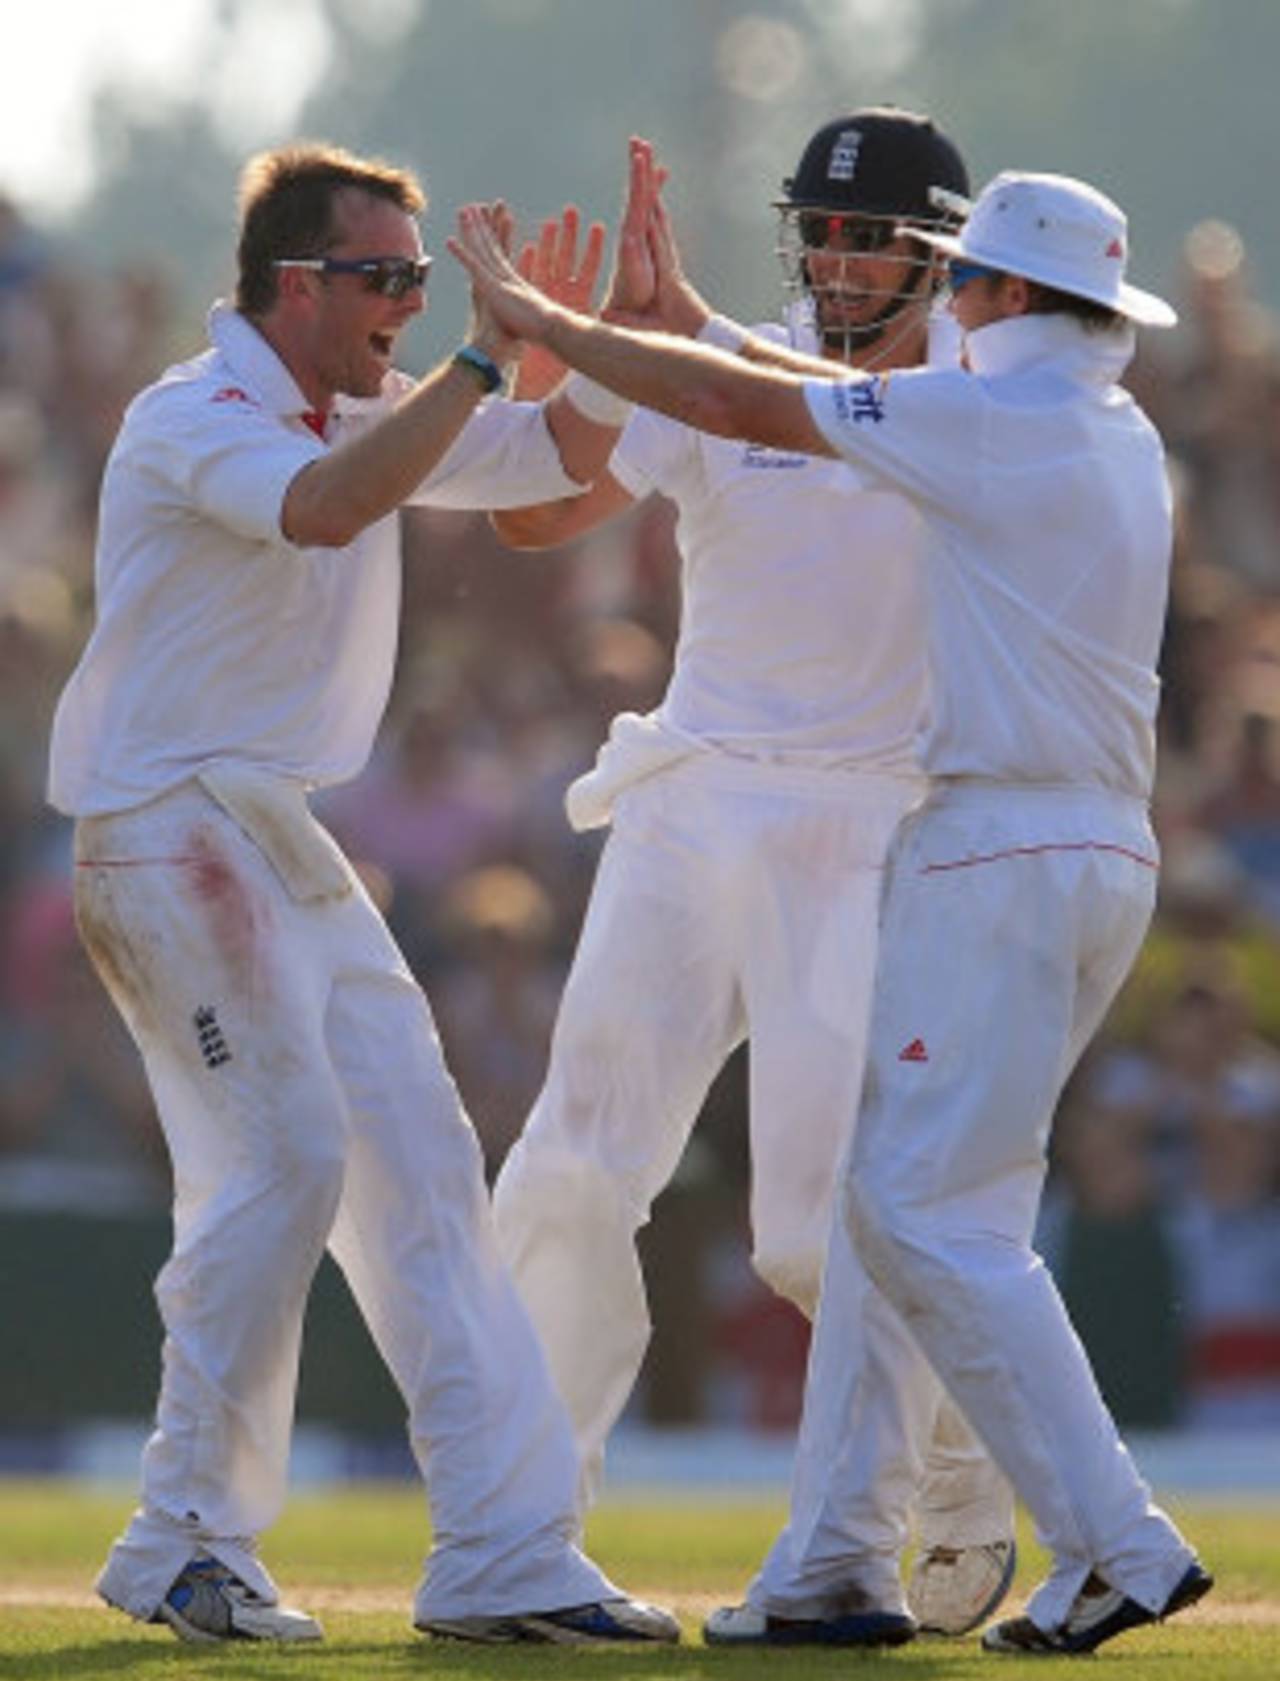 Graeme Swann ripped into Sri Lanka with four wickets on the second day, Sri Lanka v England, 1st Test, Galle, 2nd day, March 27, 2012